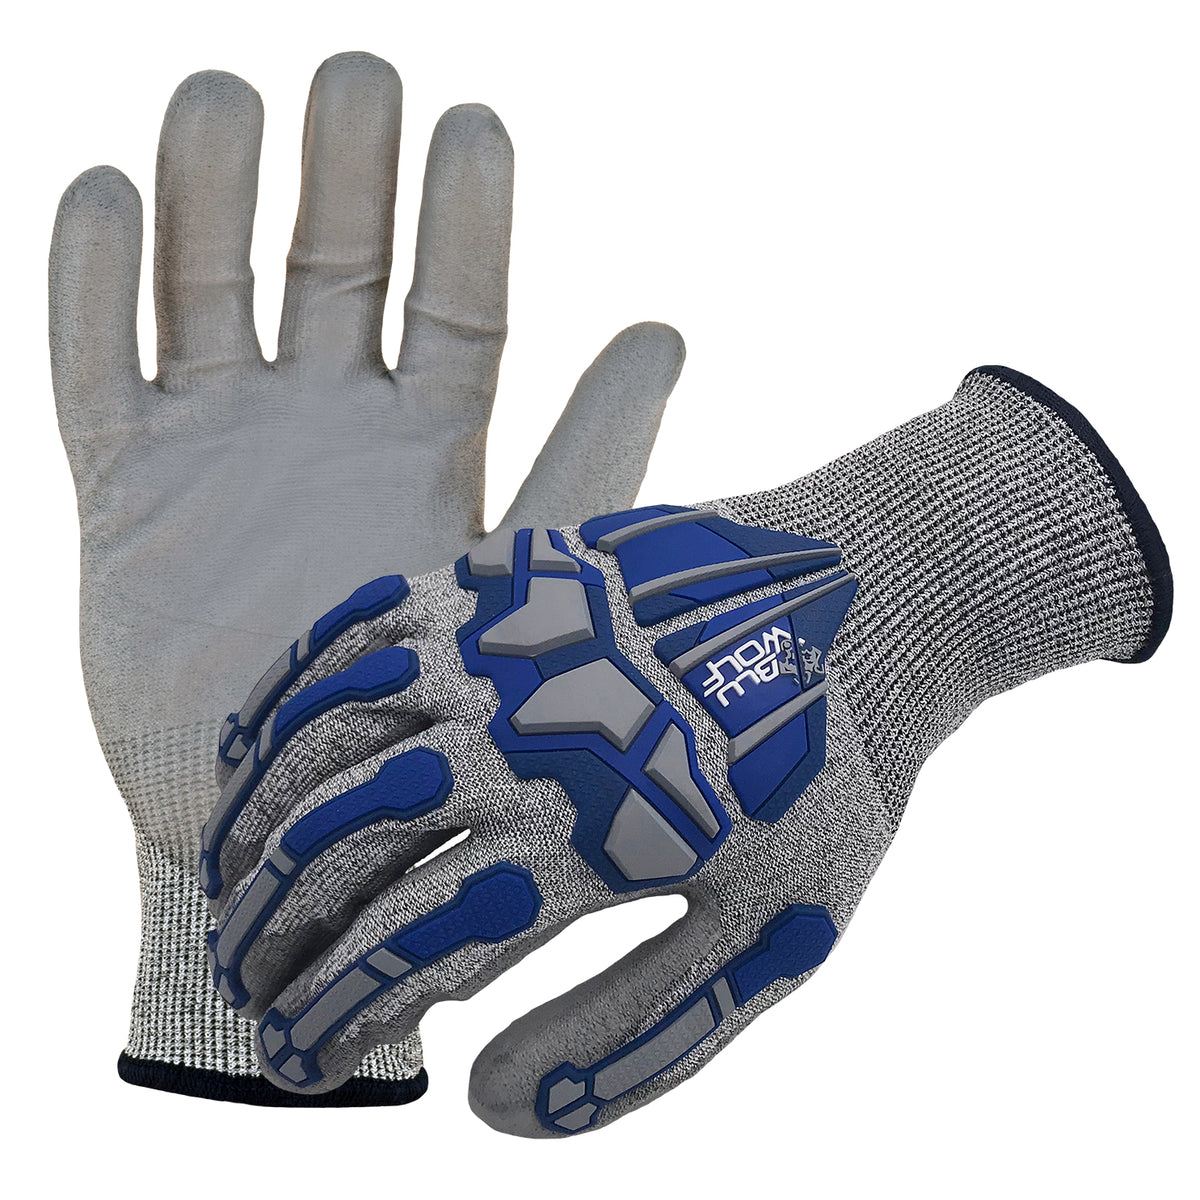 Advance ANSI A4 Level 4 Cut Resistant 13 Gauge HPPE Glove with Grey  Polyurethane Coating - 12 Pairs